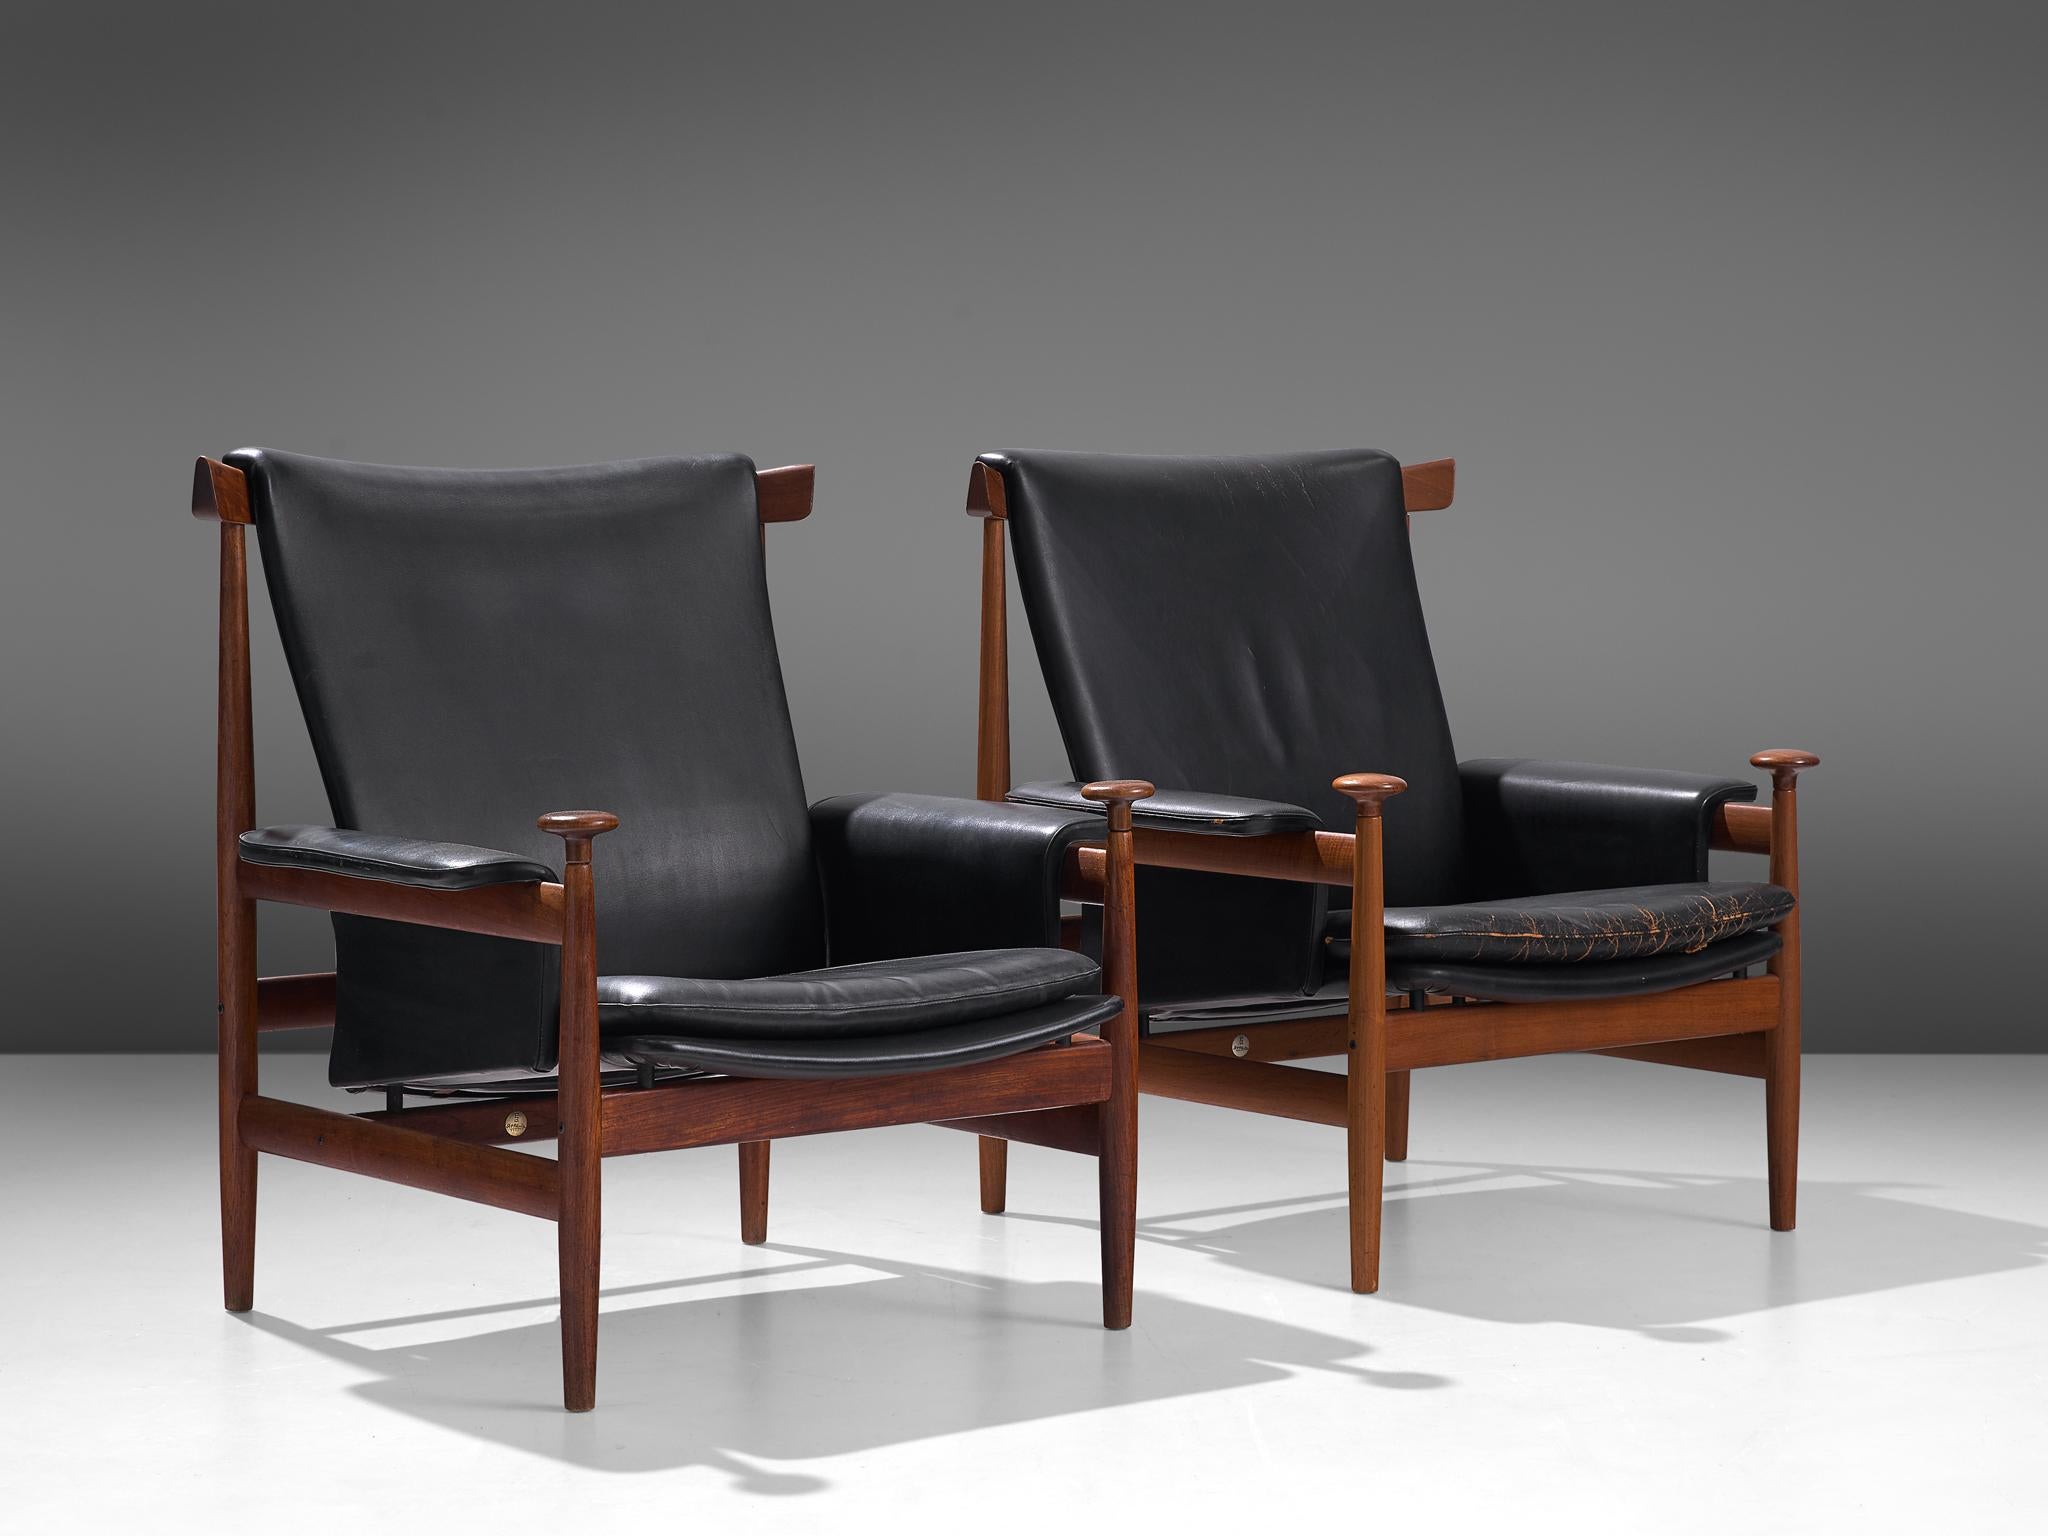 Finn Juhl for France and Son, two 'Bwana' lounge chairs teak and black leatherette, Denmark, 1962 design, 1960s production.

These are two excellent solid teak versions of Finn Juhl's 'Bwana' chair. The 